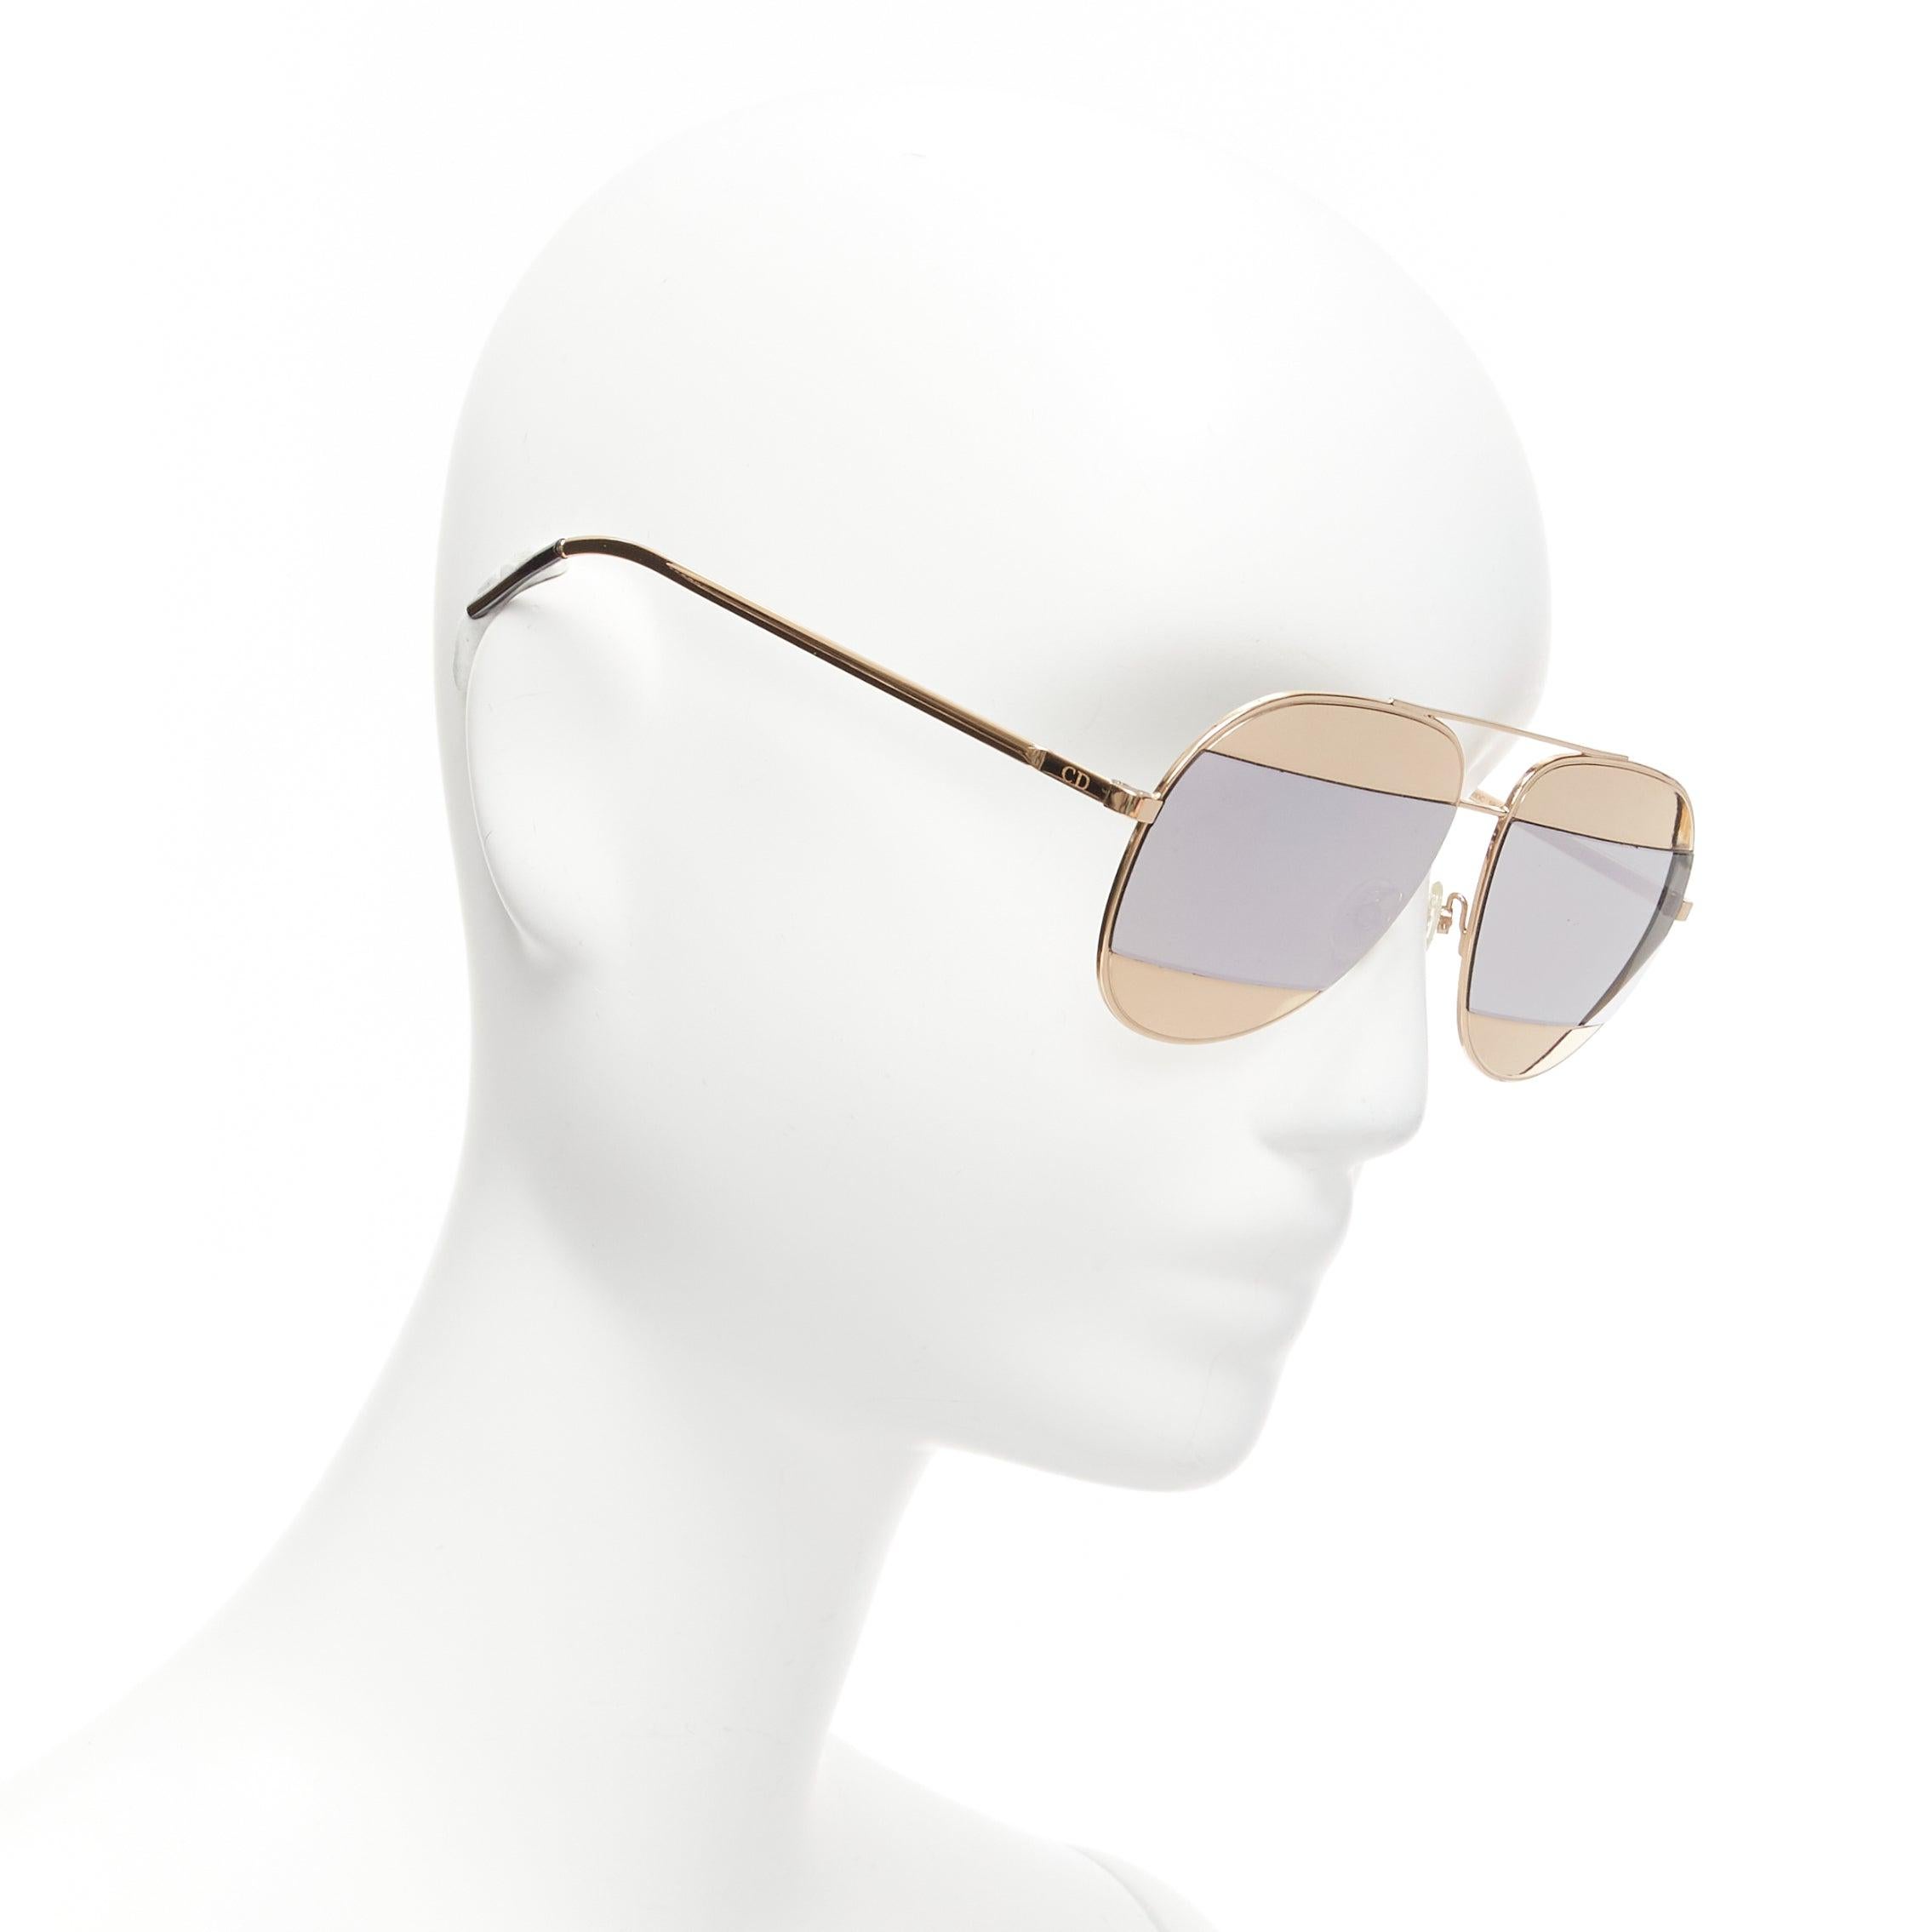 CHRISTINA DIOR Dior Split 1 gold metal mirrored silver aviator sunglasses
Reference: NKLL/A00079
Brand: Dior
Model: Dior Split 1
Material: Metal
Color: Gold, Silver
Pattern: Solid
Made in: Italy

CONDITION:
Condition: Very good, this item was